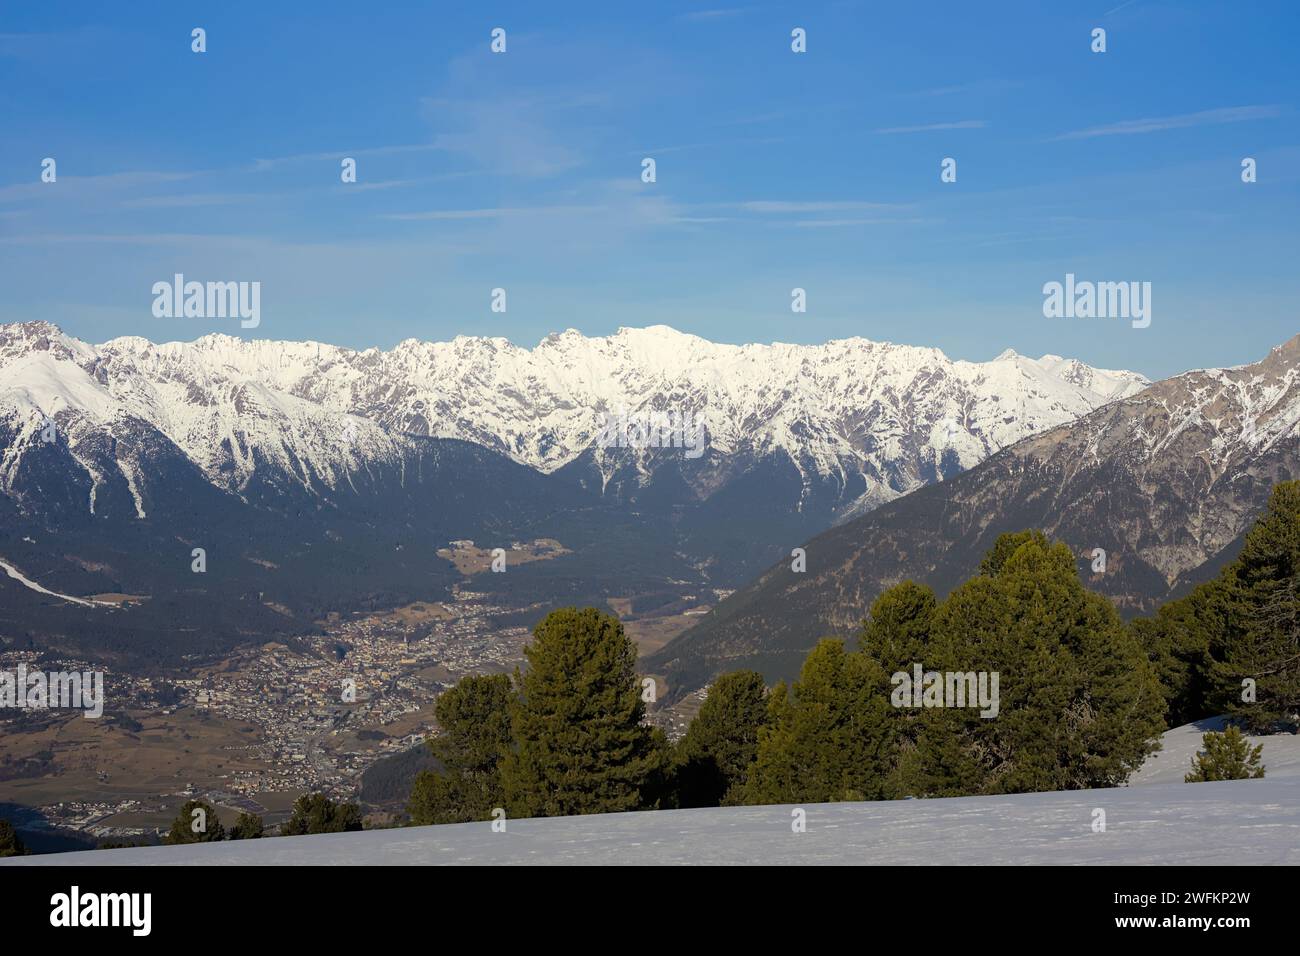 Hochzeiger area in winter with snow covered  peaks. Tyrolian alps in austria close to Imst. Stock Photo